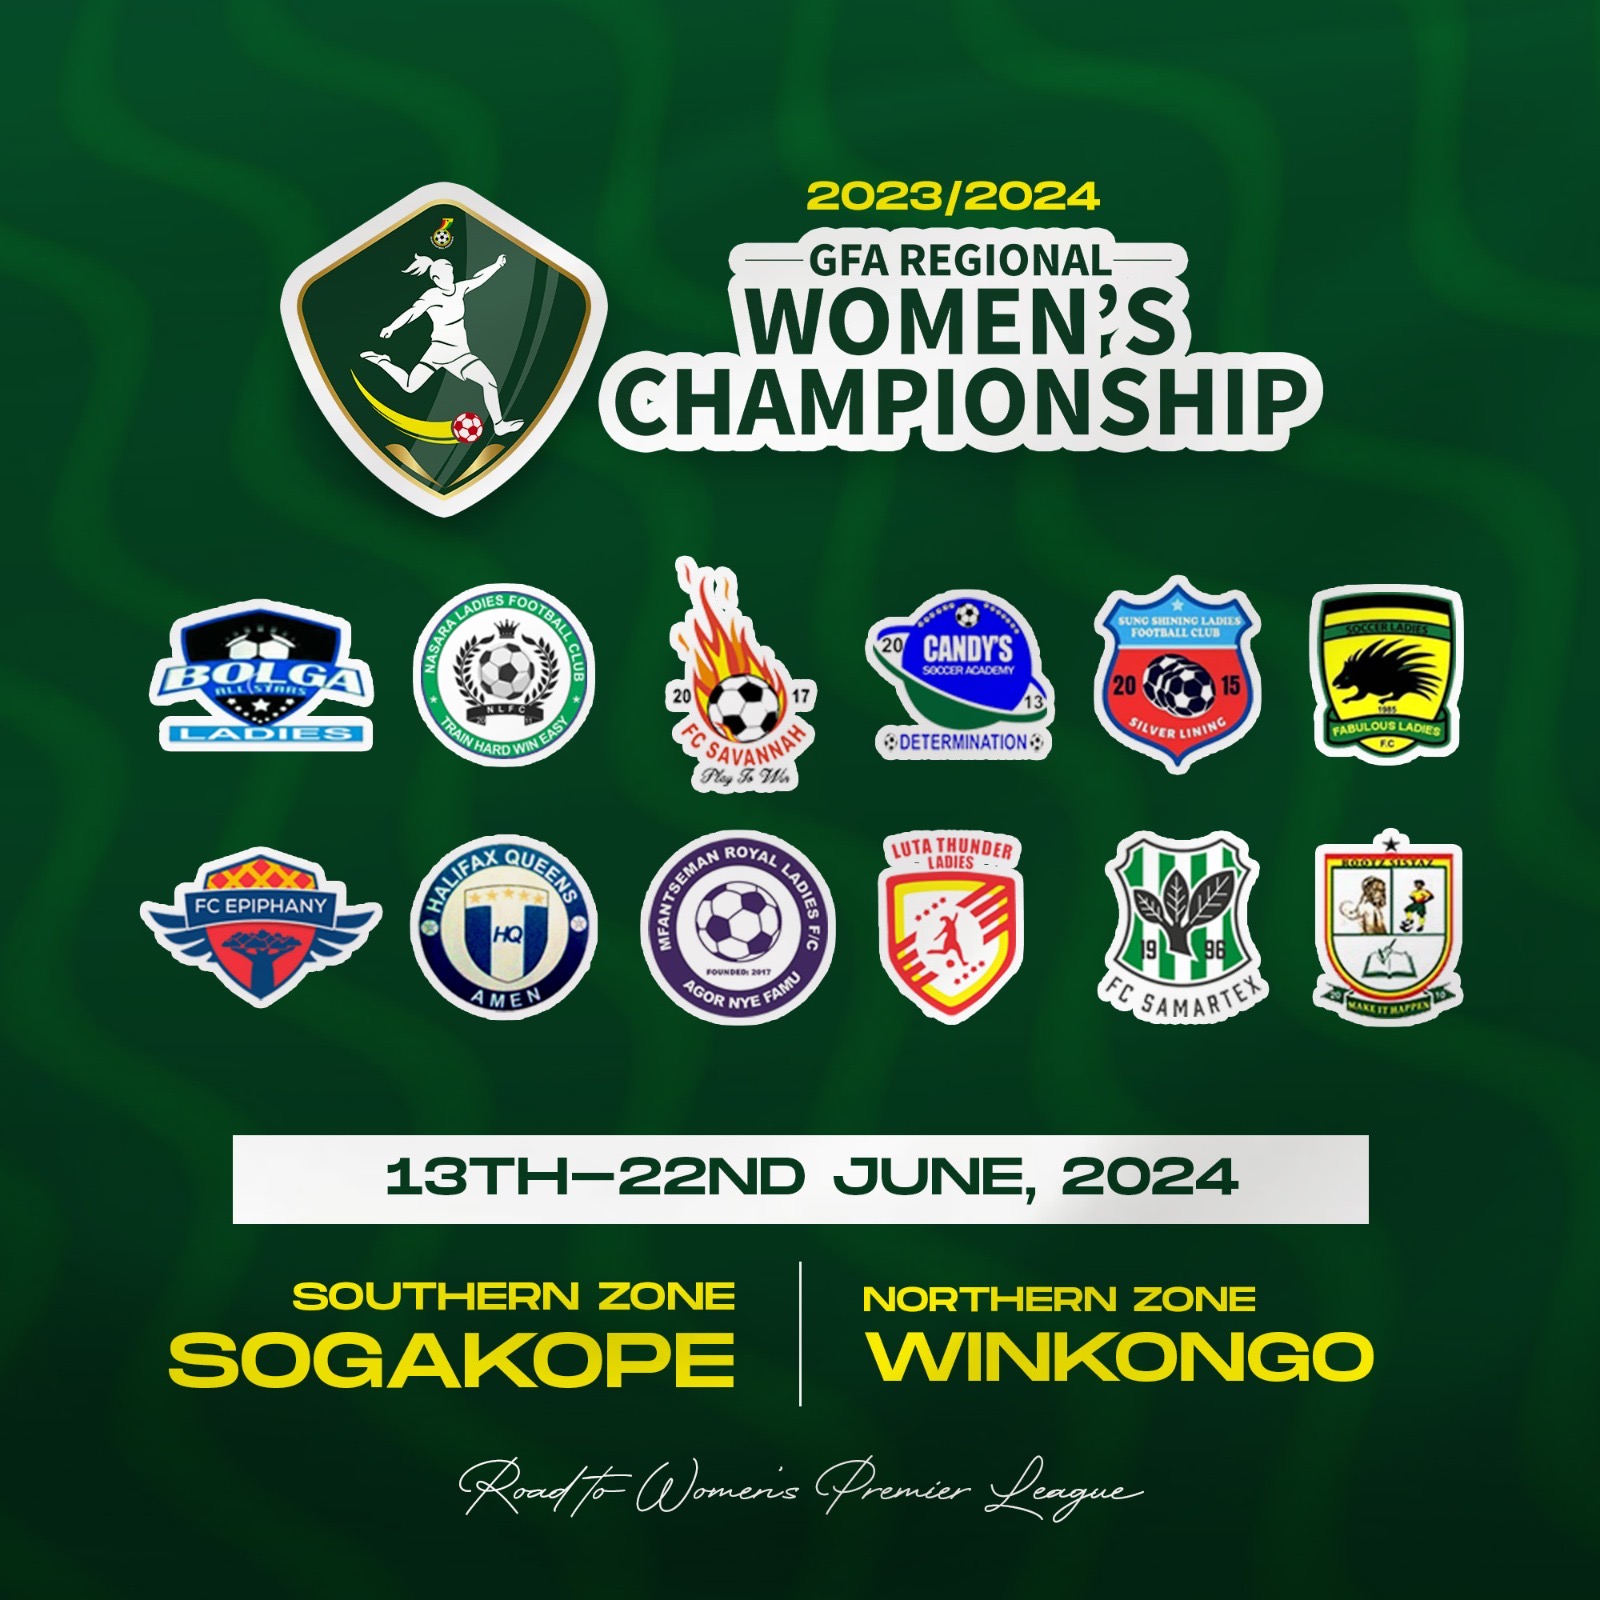 Profiles of all qualified teams for the Women's Division One Zonal Championship